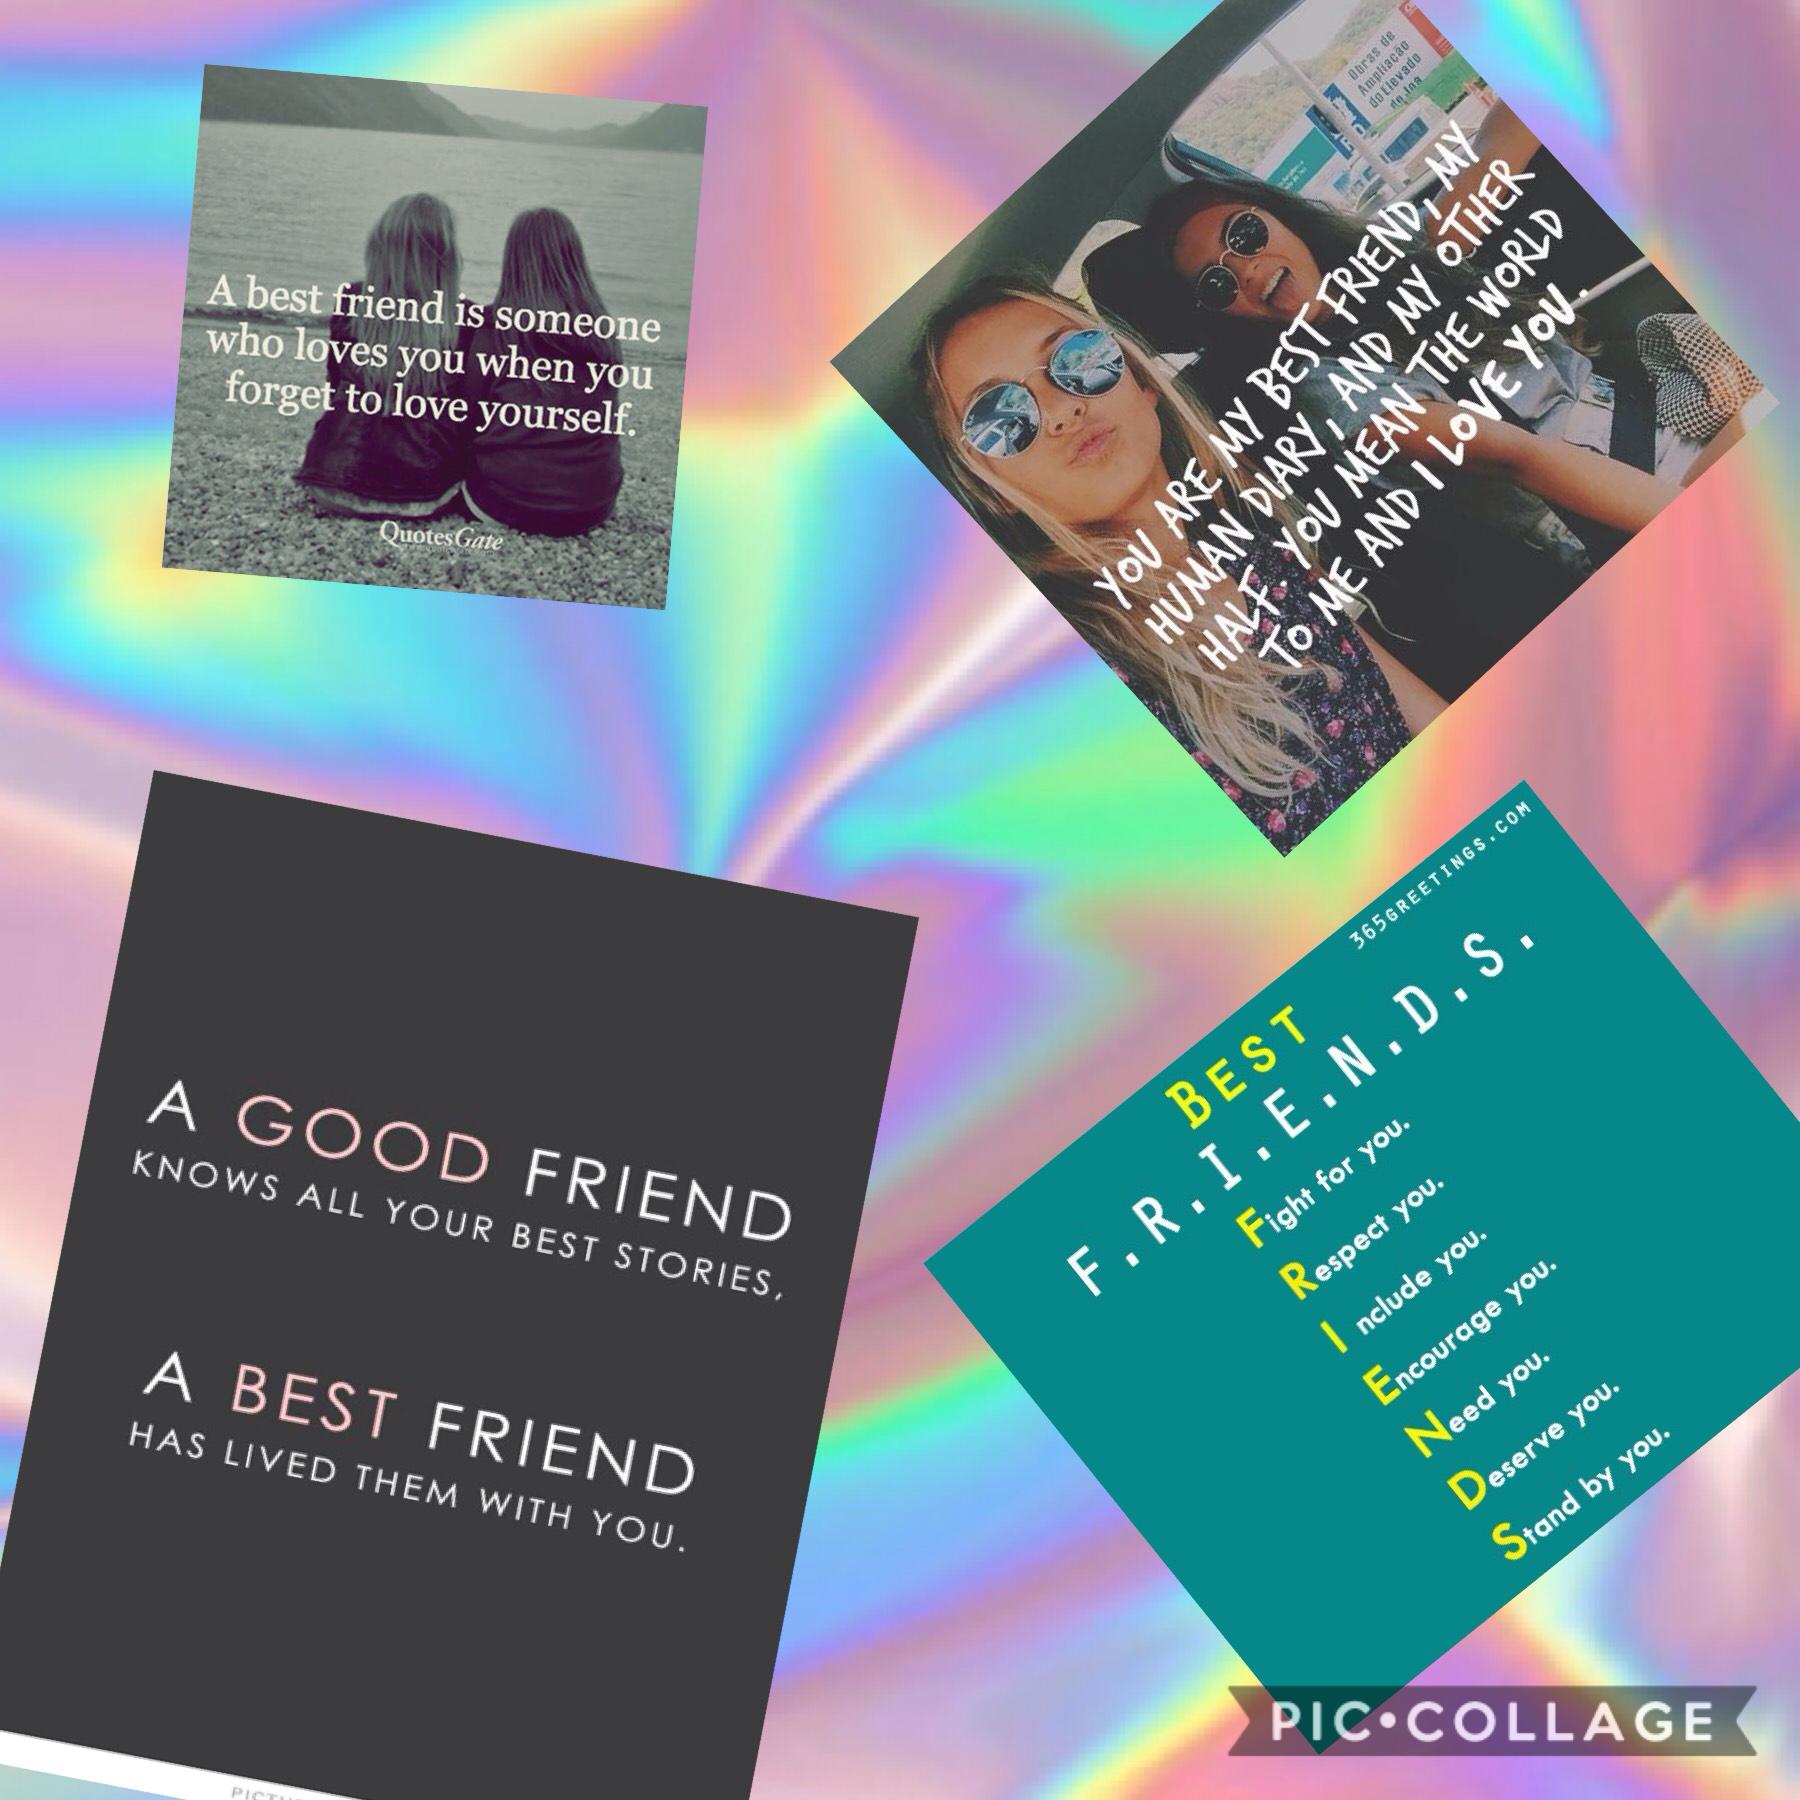 I look at this and it reminds how lucky I am to have amazing friends that help me through the everything. Lexie. Ruby. Evie. Leah. Tilly. Millie. Anita. Evie. Jas.  Amber. Georgie. Chloe. Evie S. Emily. Alice. Thanks girls ❤️❤️❤️❤️❤️❤️❤️❤️❤️❤️❤️❤️❤️❤️❤️❤️